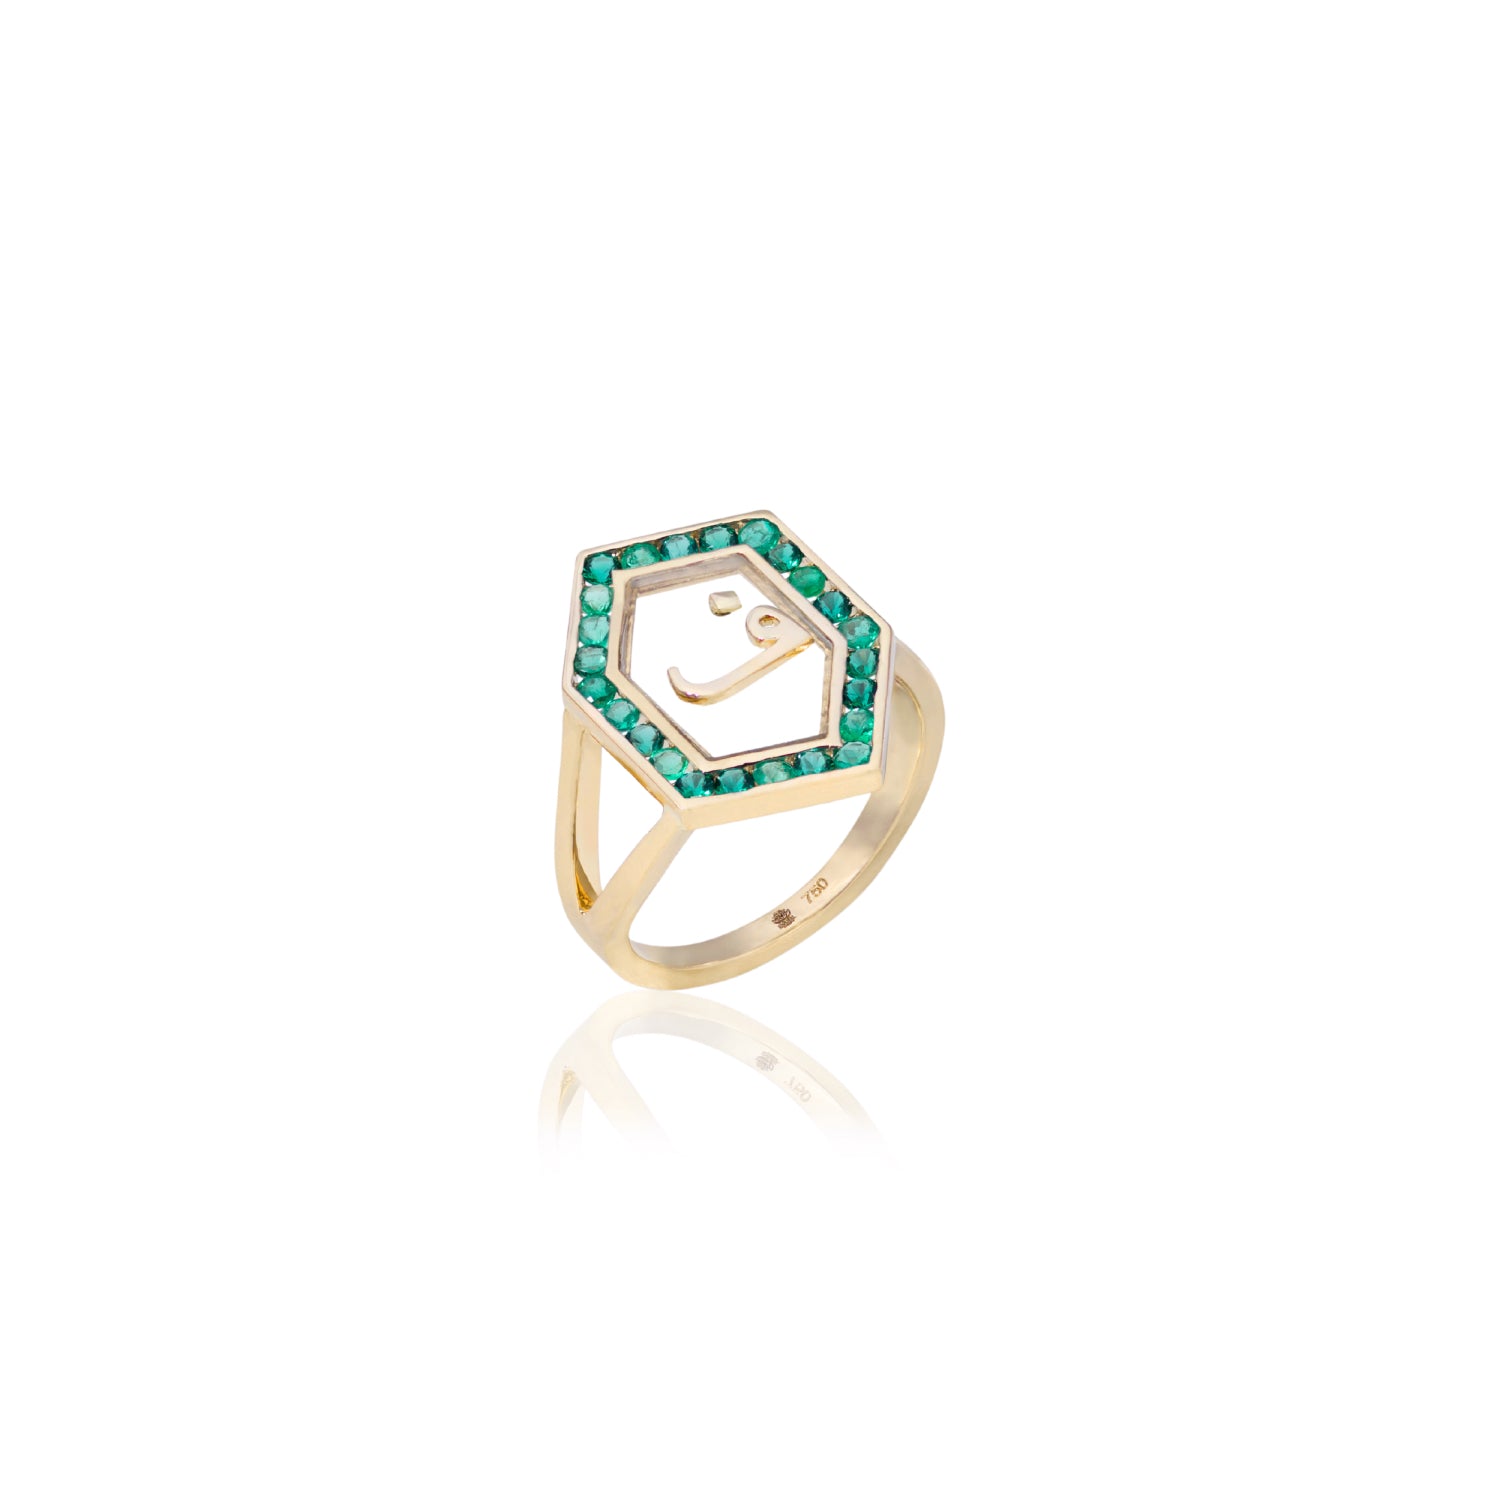 Qamoos 1.0 Letter ف Emerald Ring in Yellow Gold